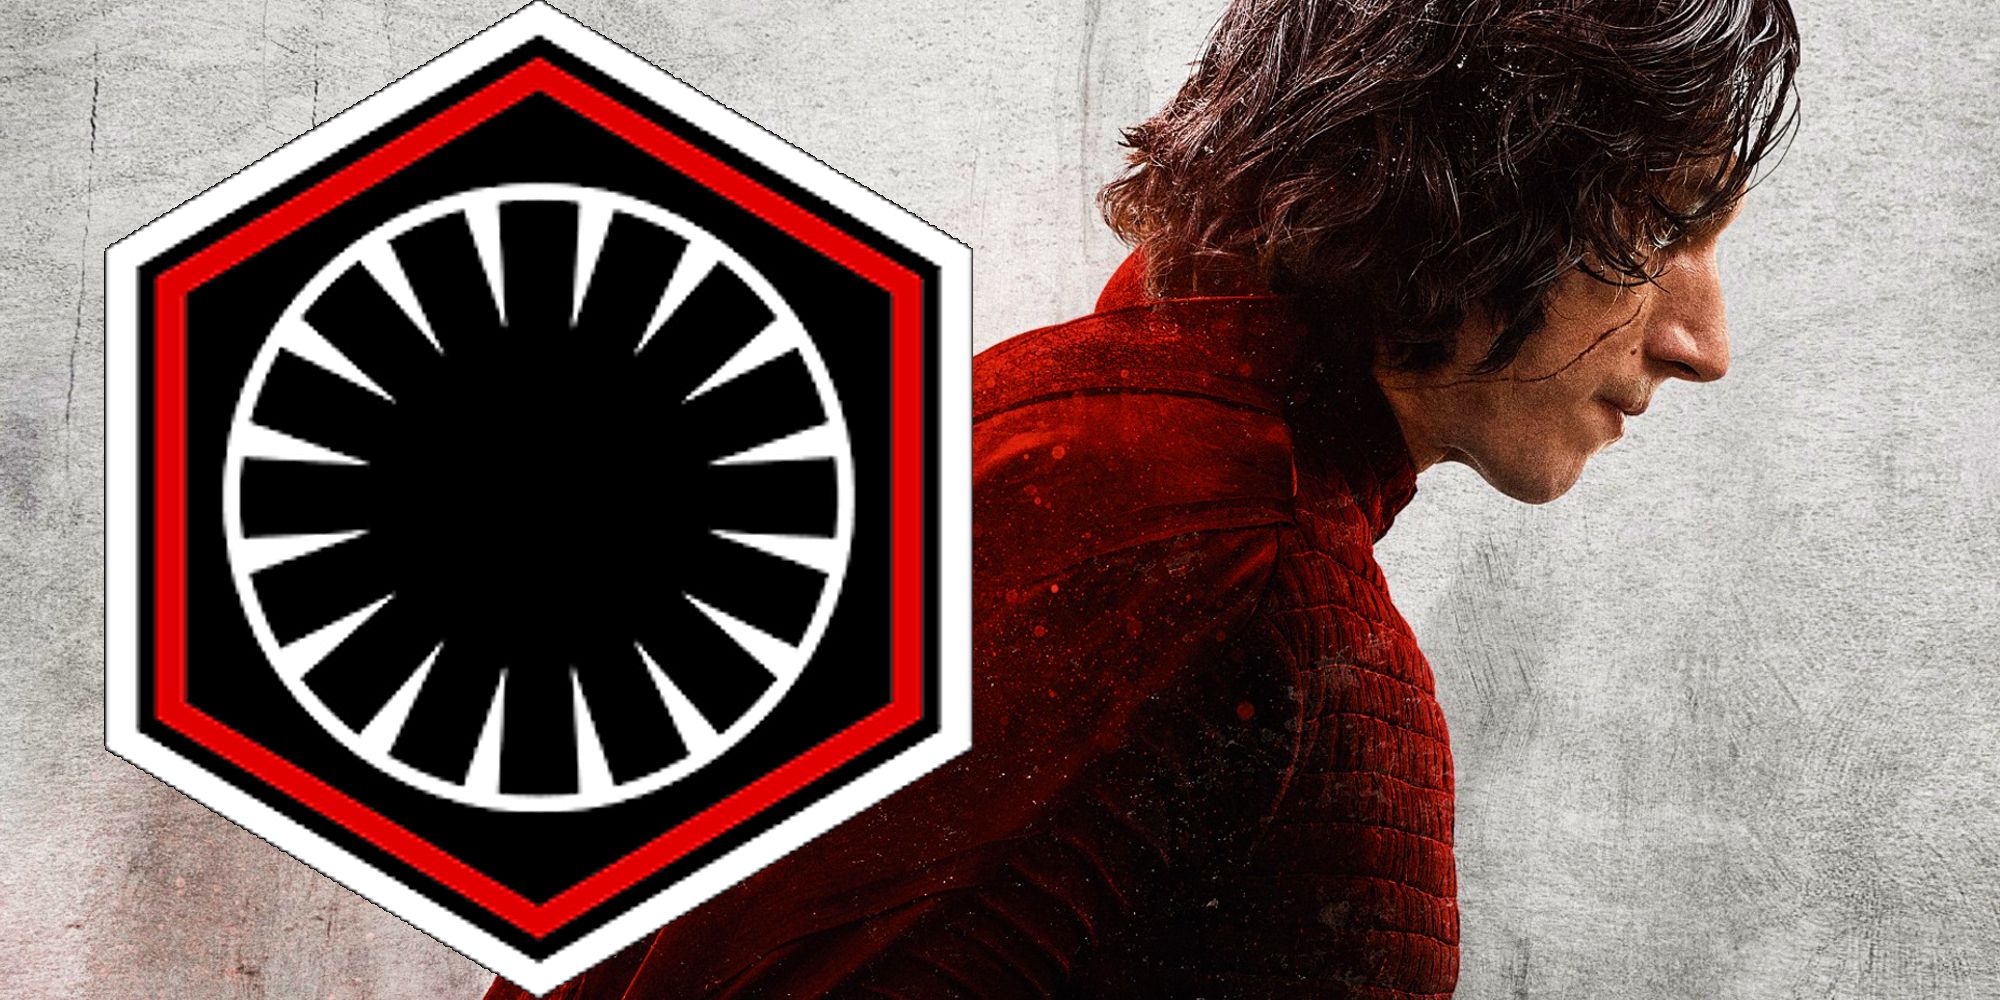 Kylo Ren from Star Wars: The Last Jedi next to the symbol for the First Order symbol